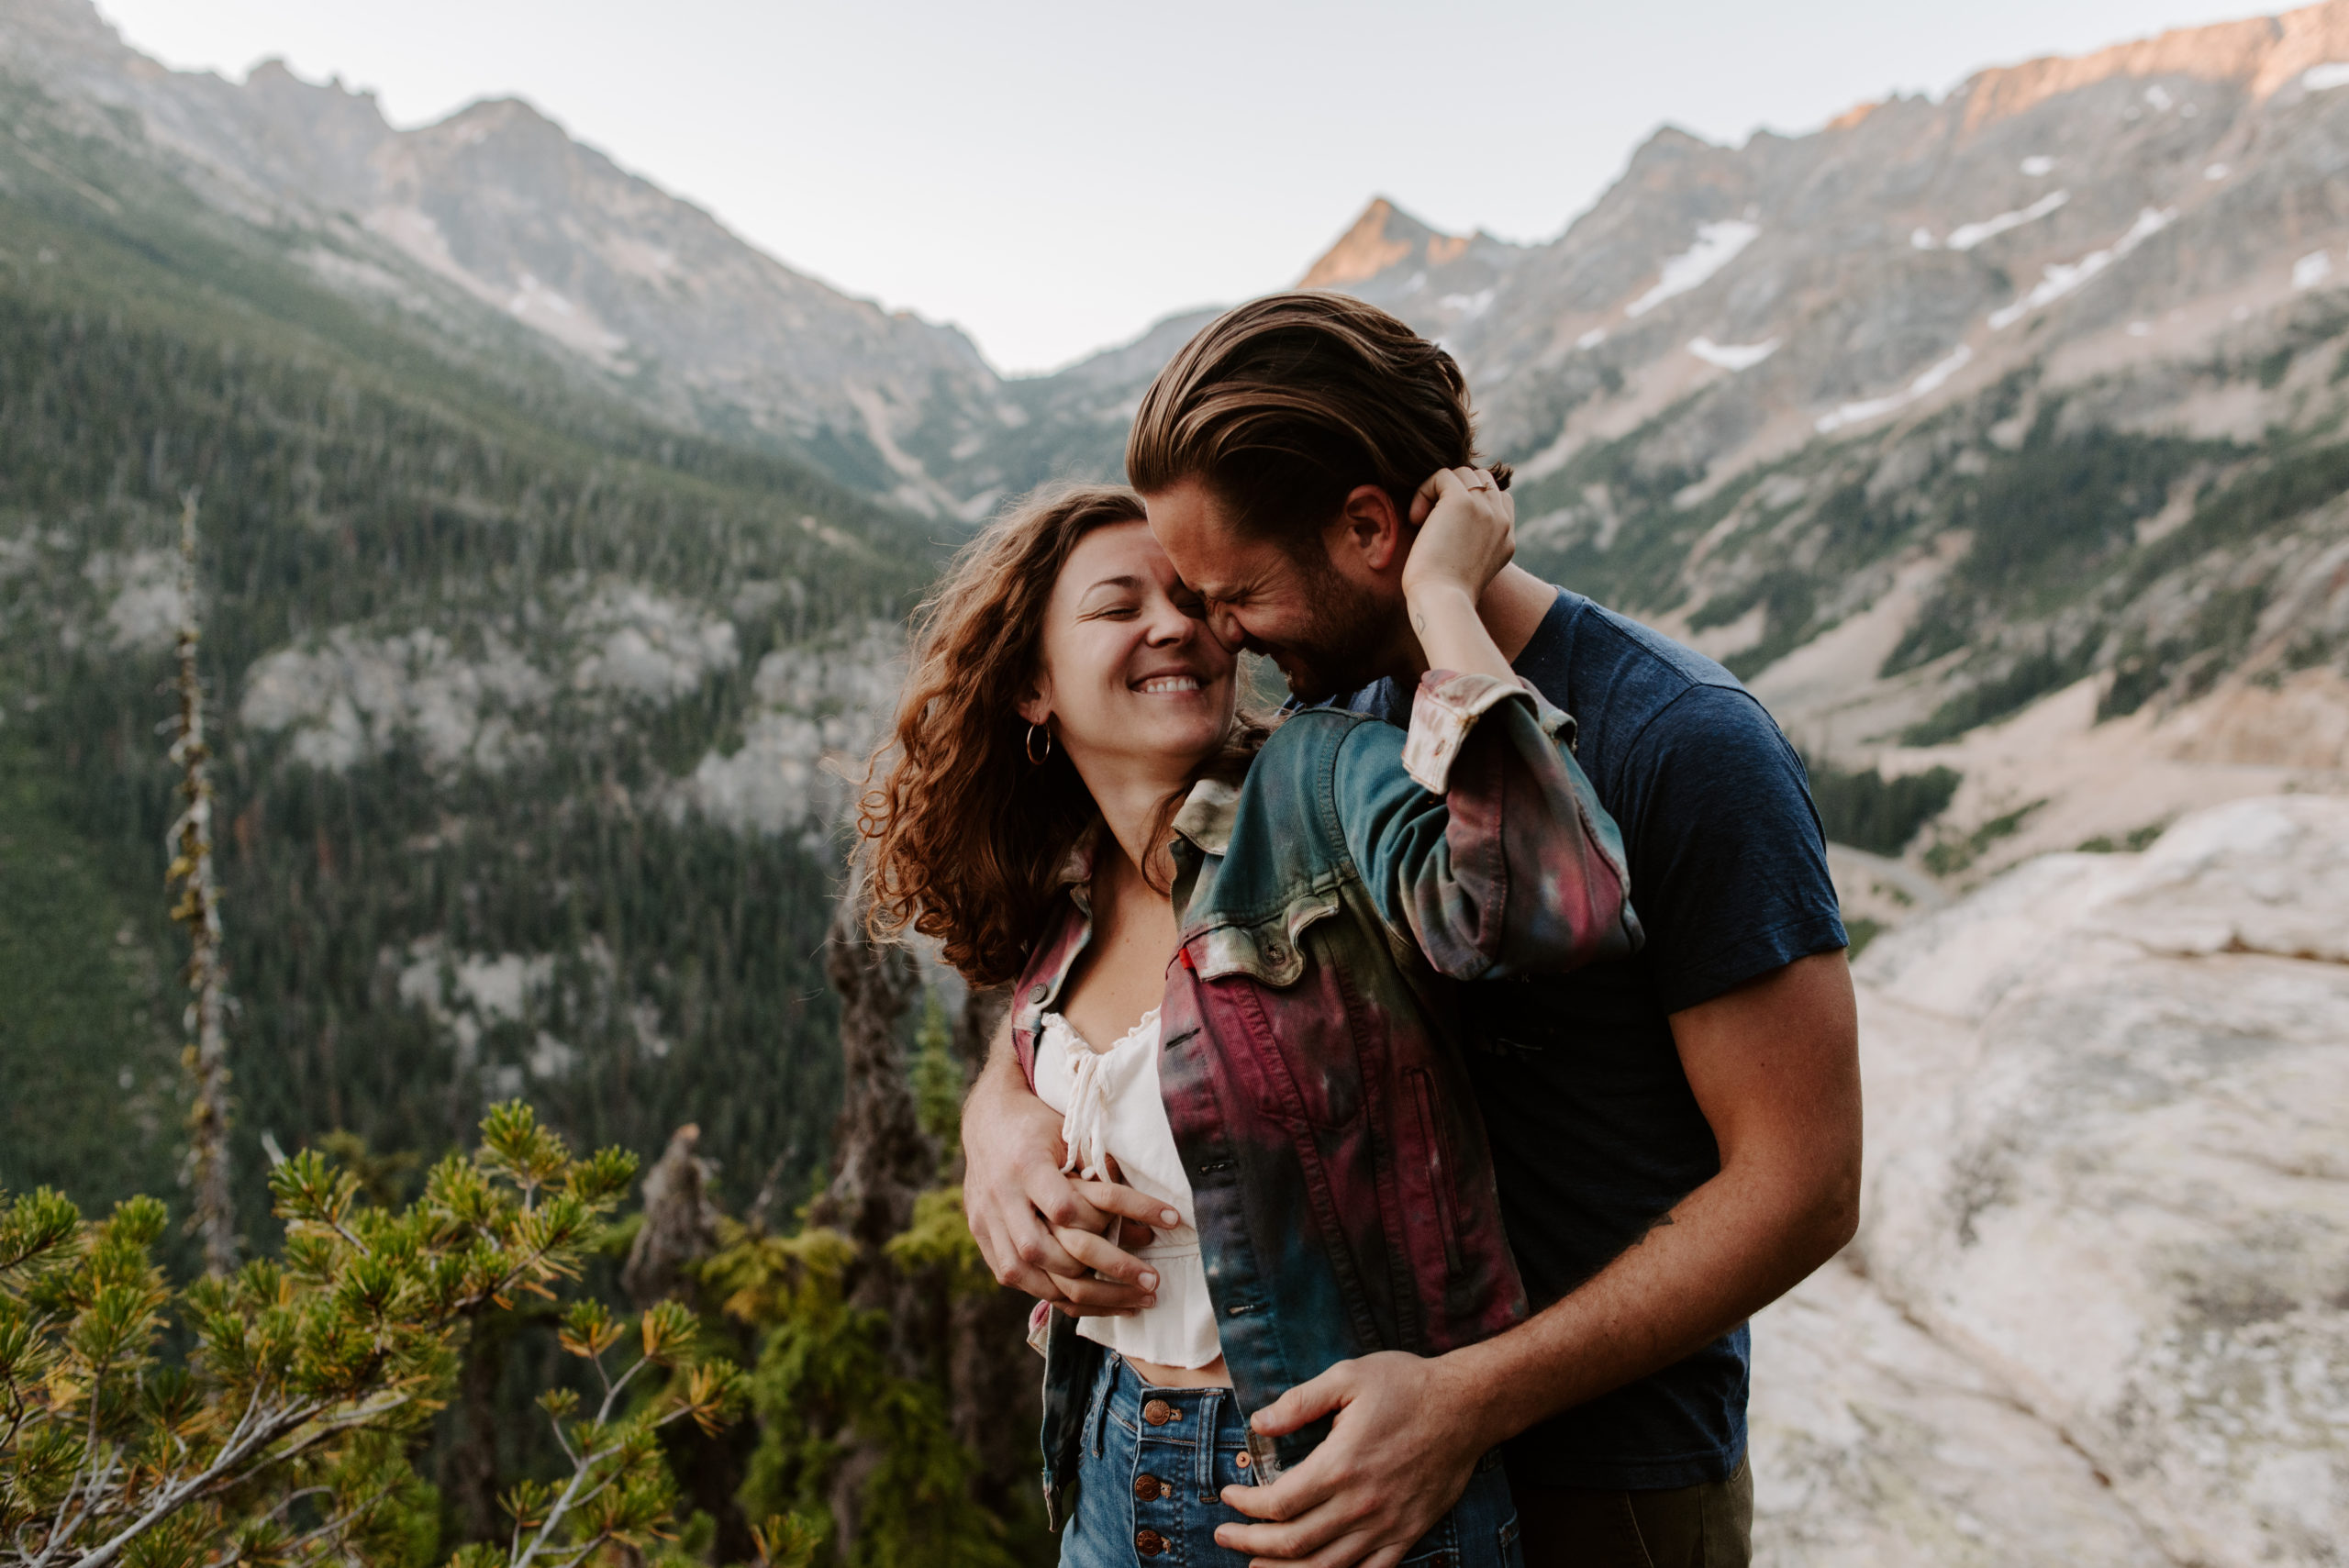 A couple embracing and smiling with a stunning mountain view in the background.